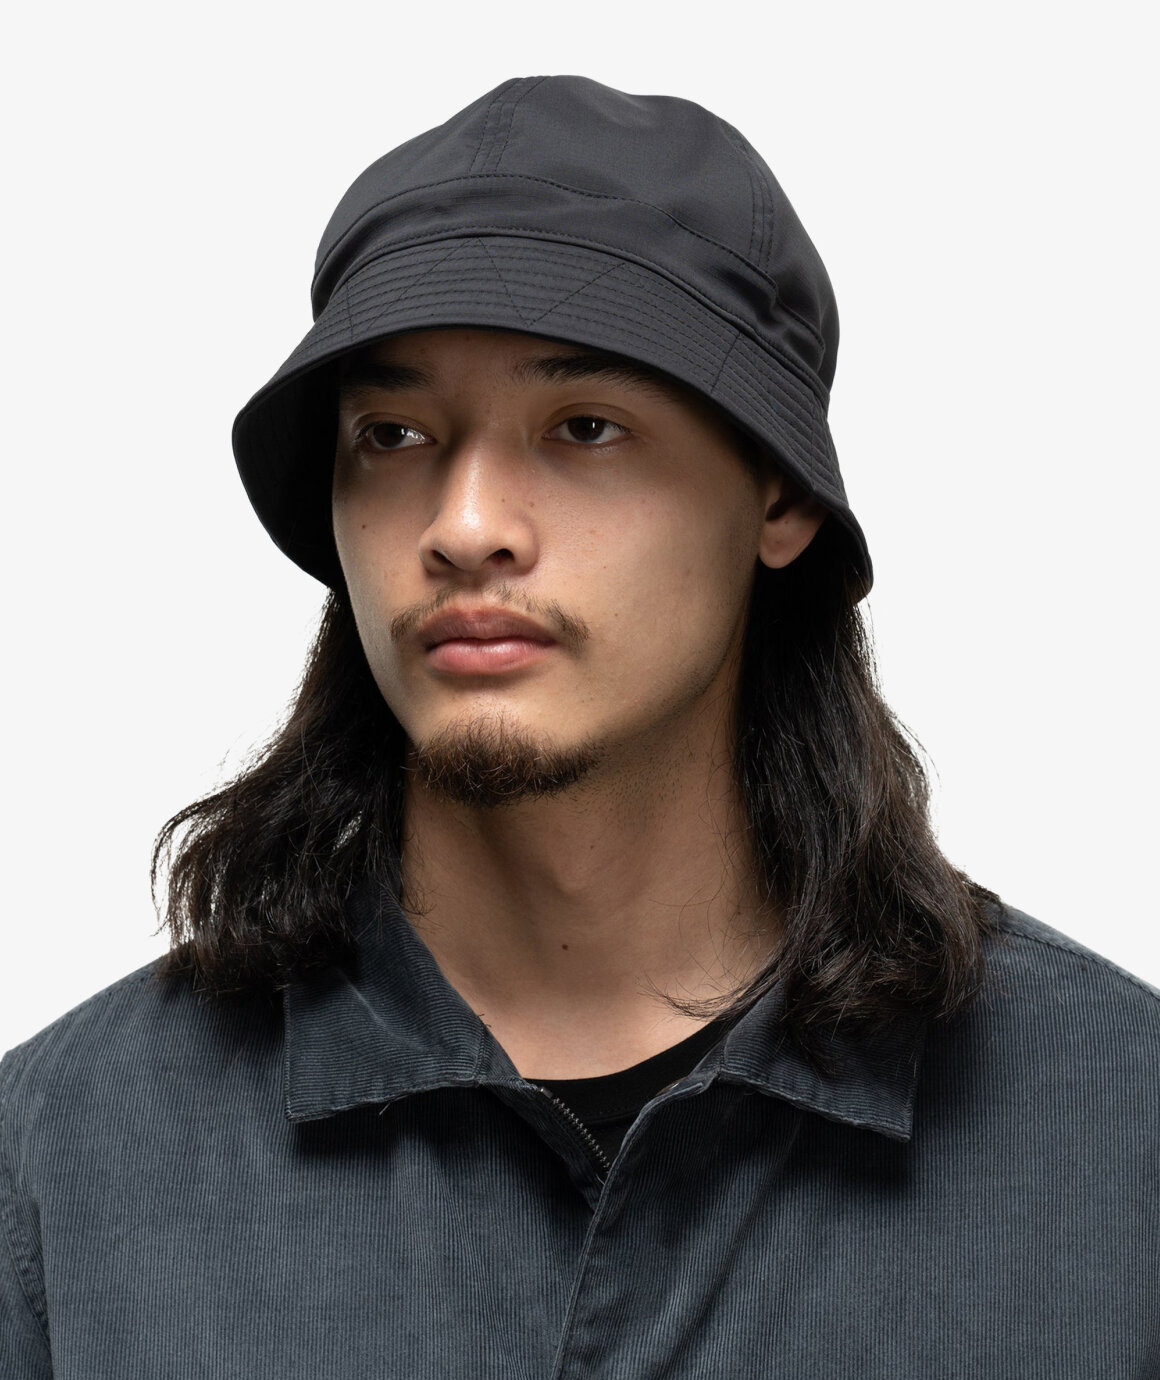 Norse Store | Shipping Worldwide - Haven Eclipse Hat - Black